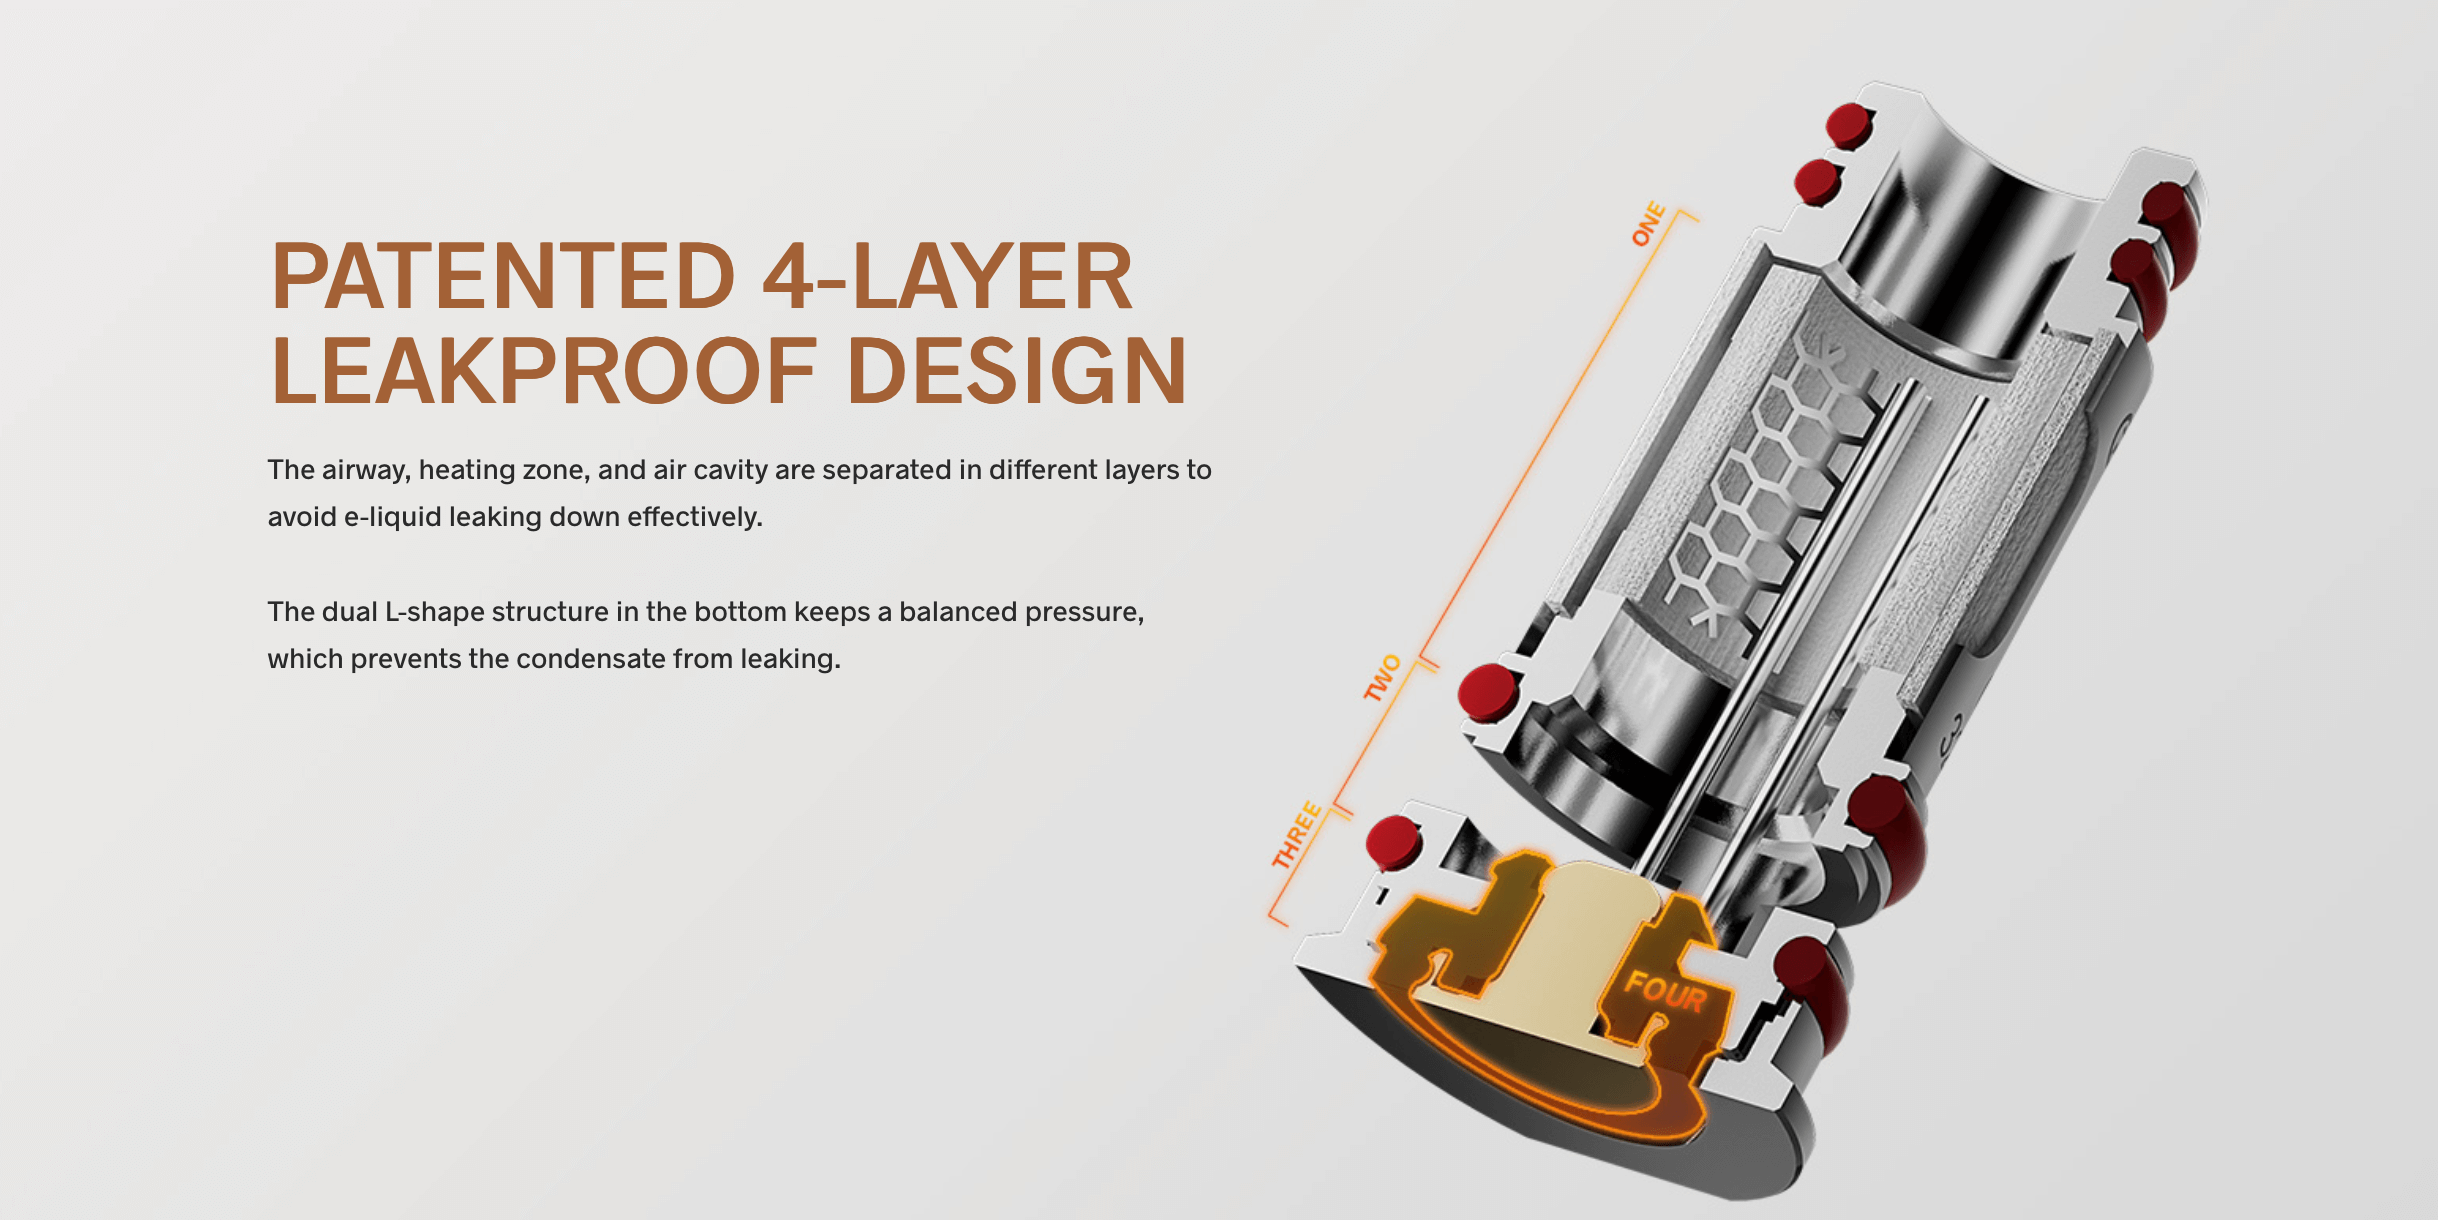 Voopoo PnP C Coils - Patented 4-Layer Leakproof Design